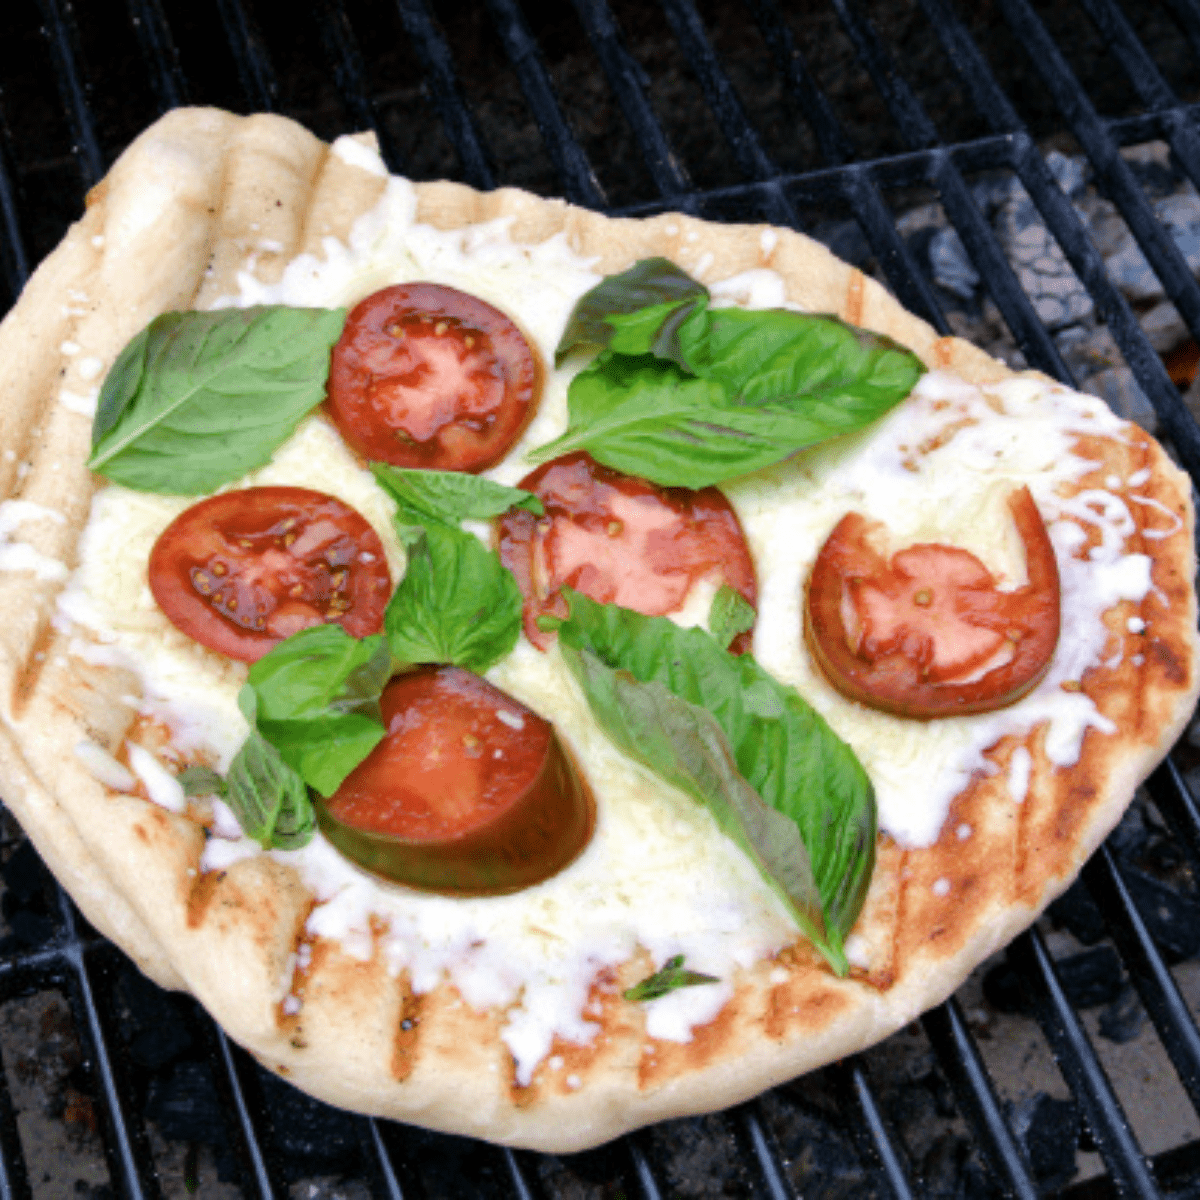 Margherita Pizza with mozzarella, basil, and tomatoes on a grill. Grill marks can be seen on the crust.